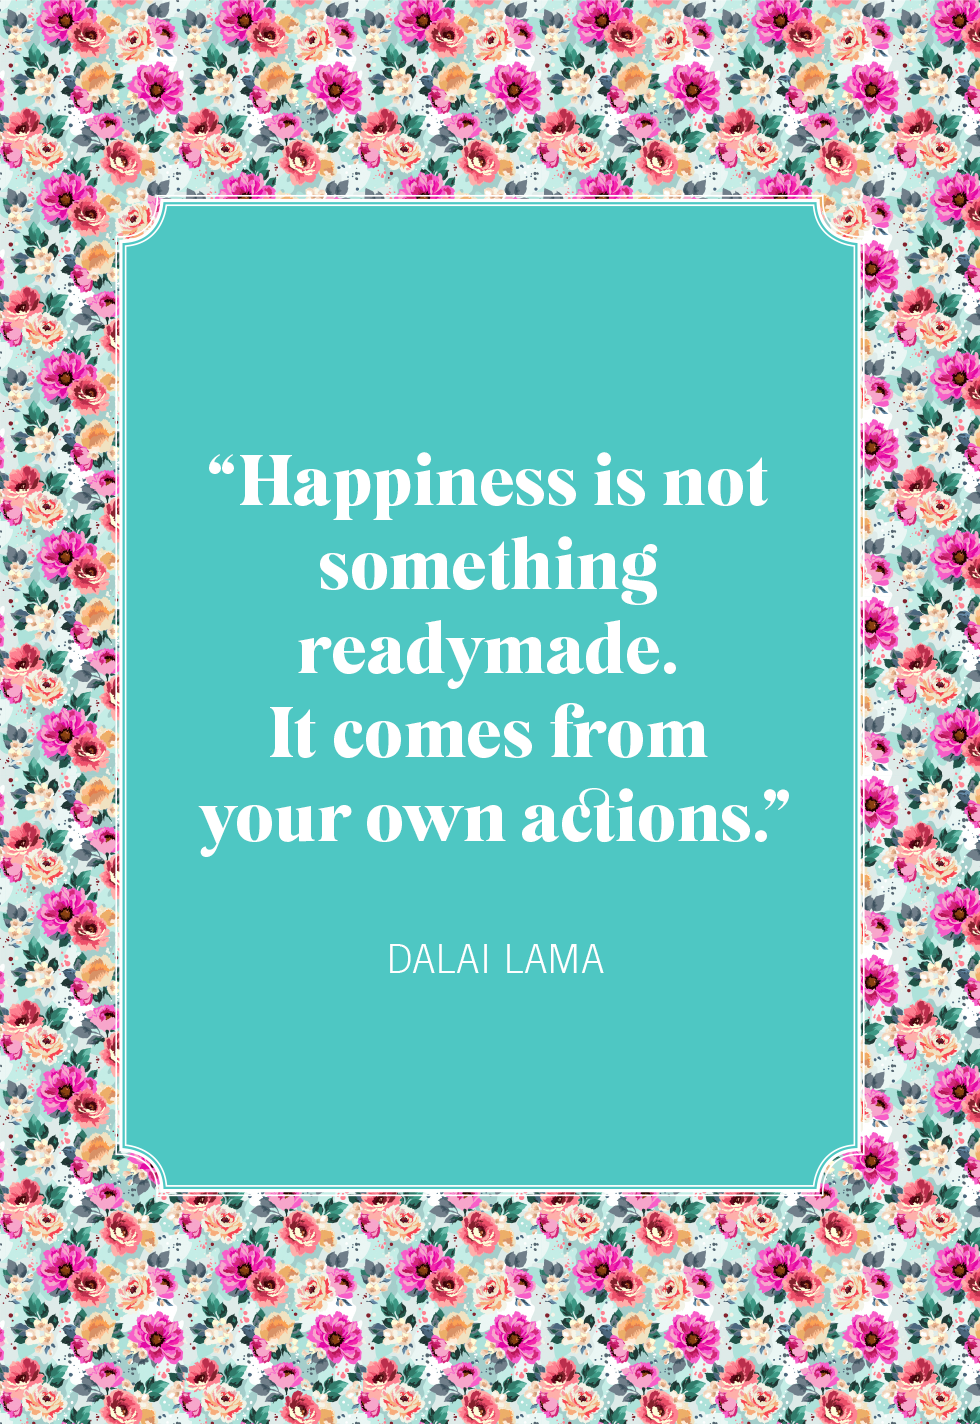 35 Best Happy Quotes - Inspiring Quotes About Happiness